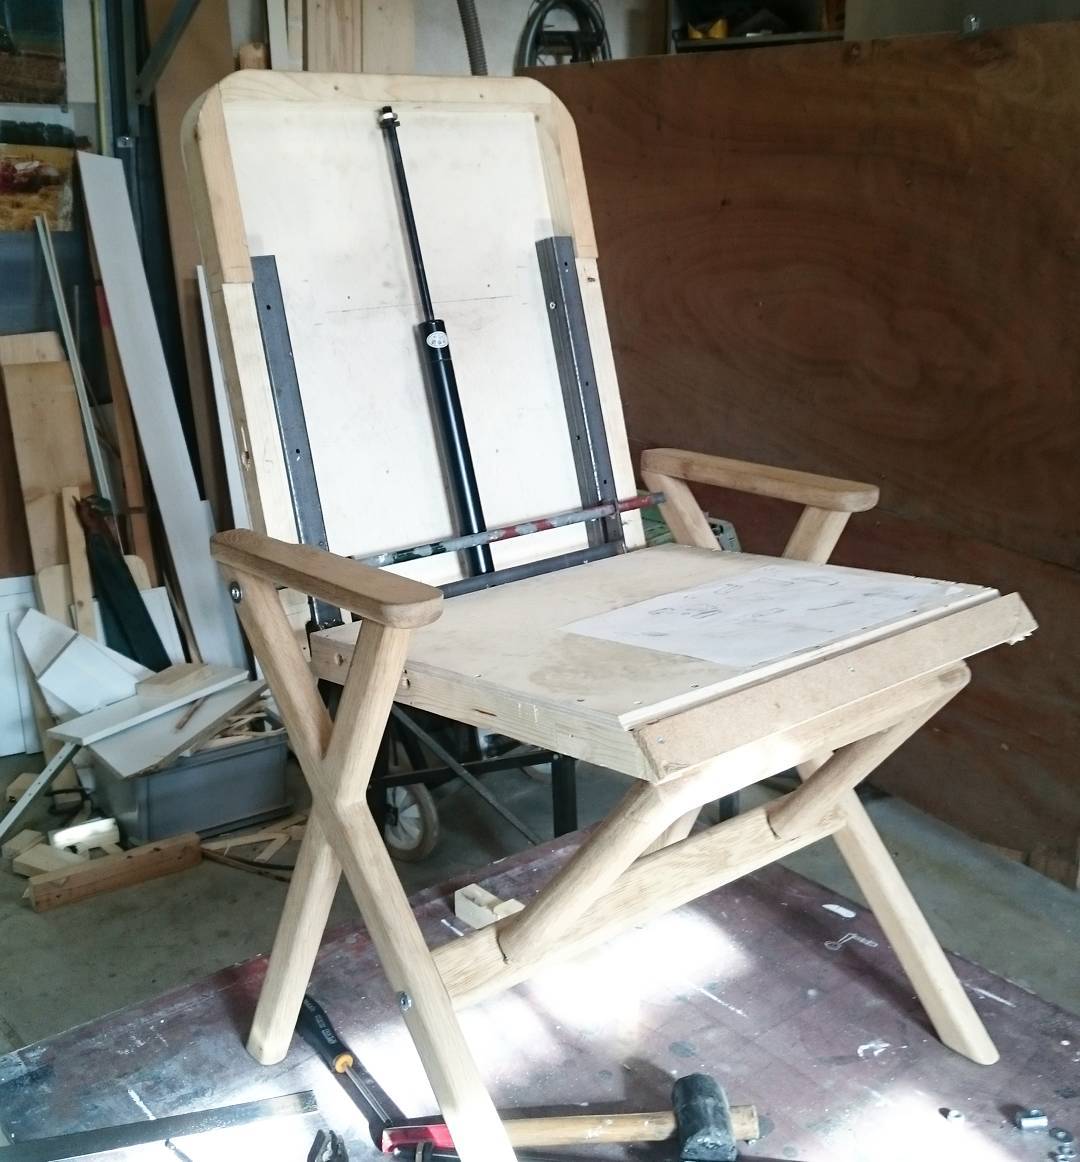 Working on the final adjustment for the Hybrid Chair before production starts